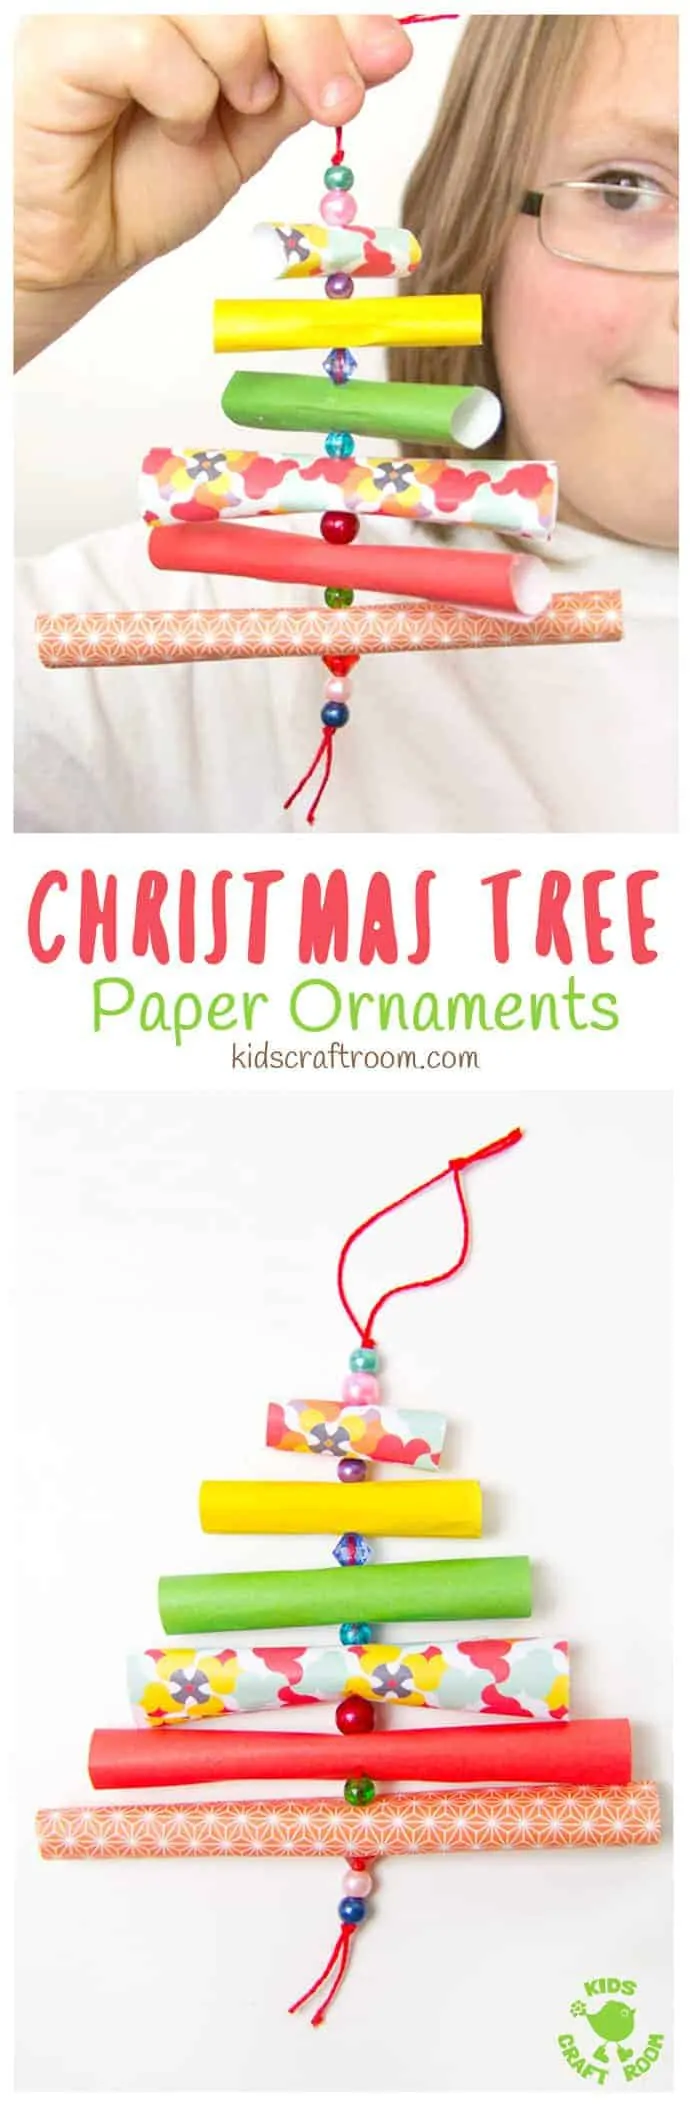 CHRISTMAS TREE PAPER ORNAMENTS - Have fun with paper & beads making adorable homemade Christmas ornaments in the shape of Christmas trees. Pretty enough for grown-ups, simple enough for kids! #christmas #christmascrafts #christmasideas #christmascraftsforkids #christmastree #papercrafts #paper #kidscrafts 